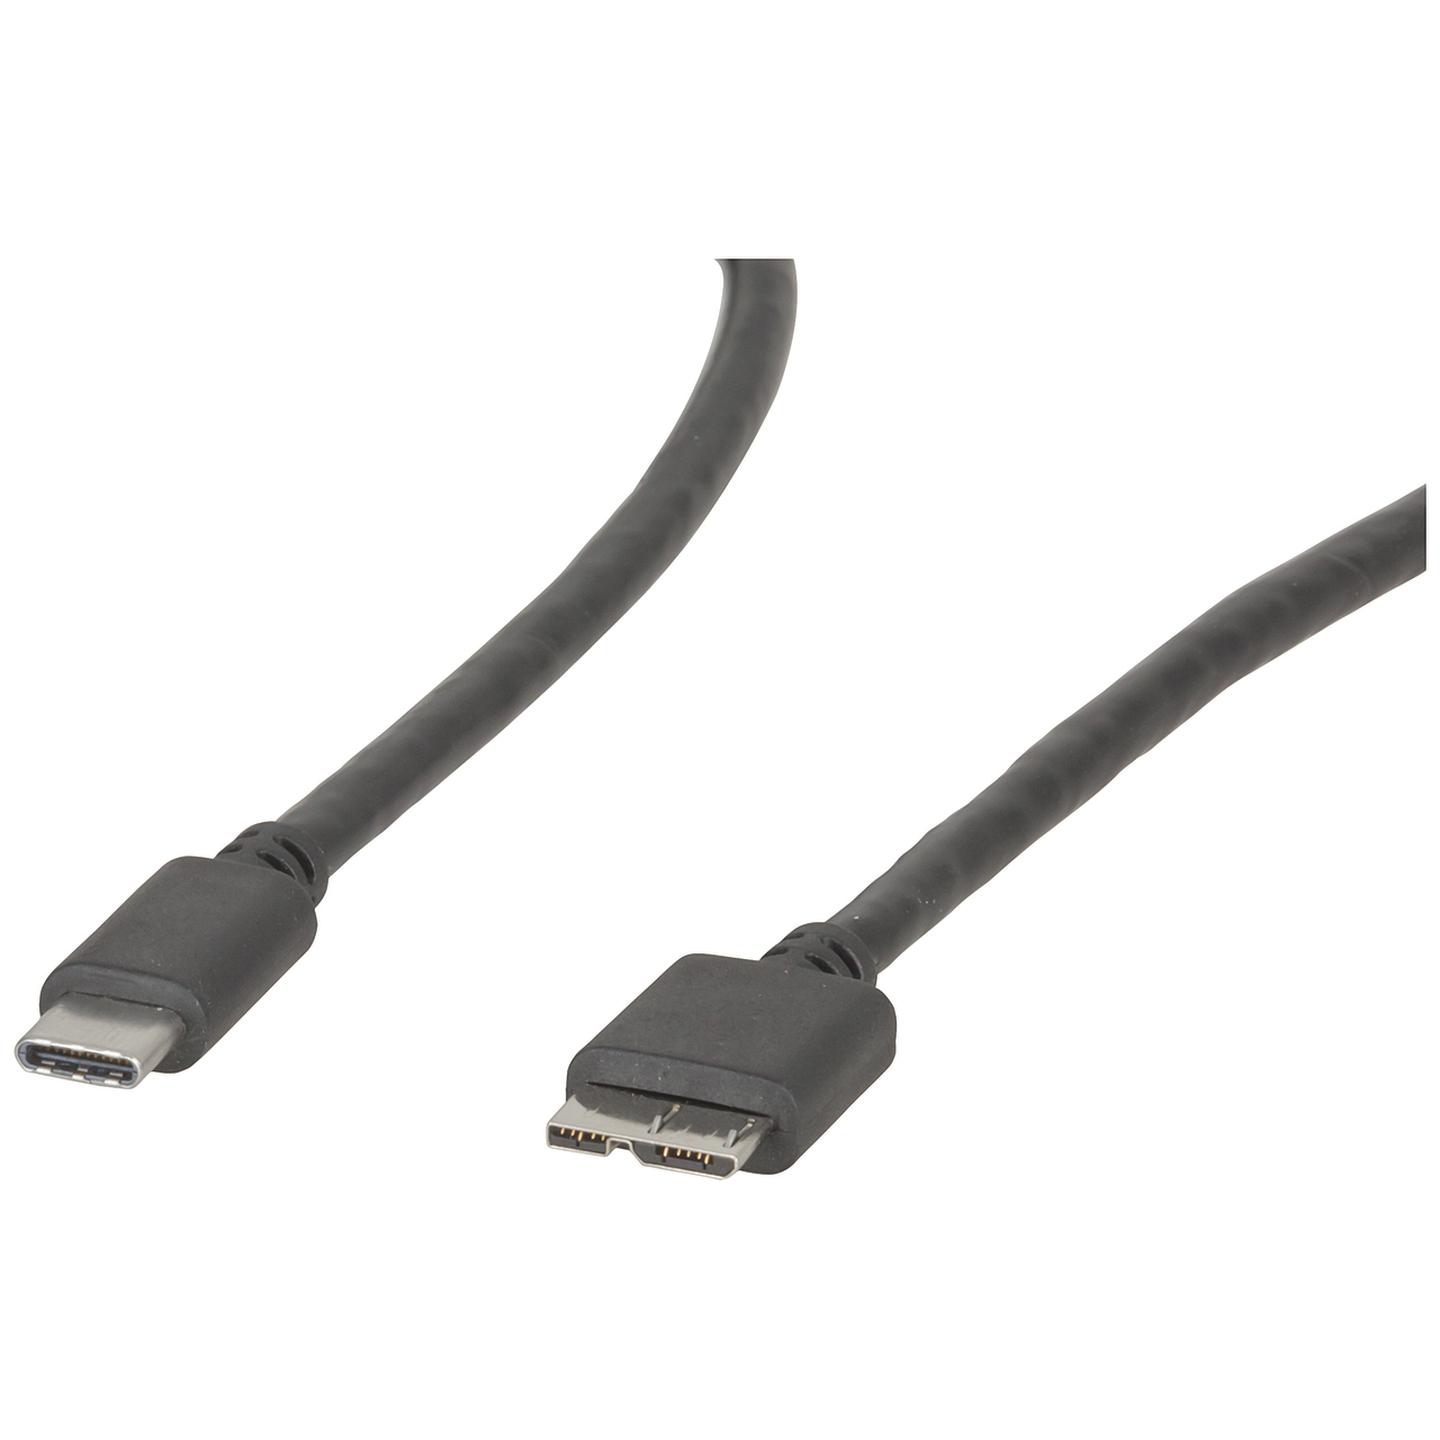 USB Type C to USB 3.0 Micro B Cable 1m